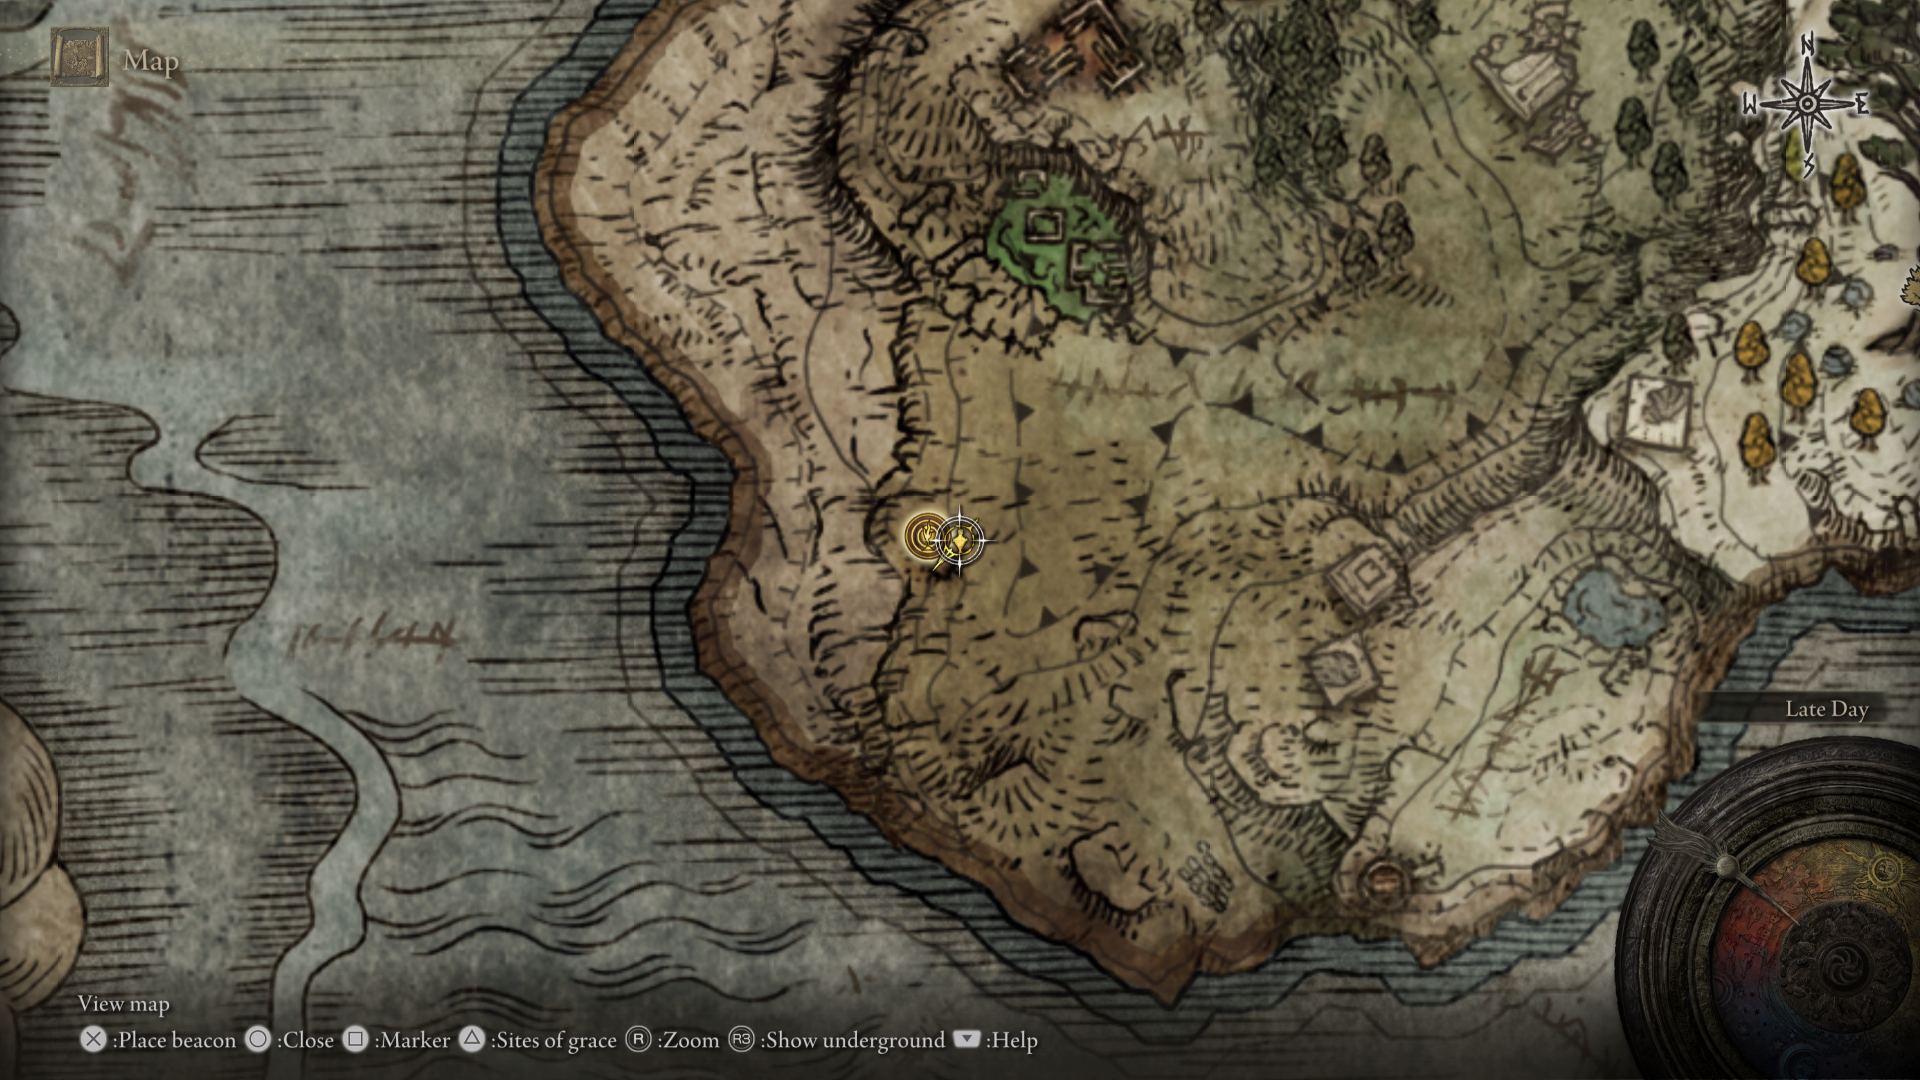 Elden Ring Stonesword Key locations: The main courtyard is showcased